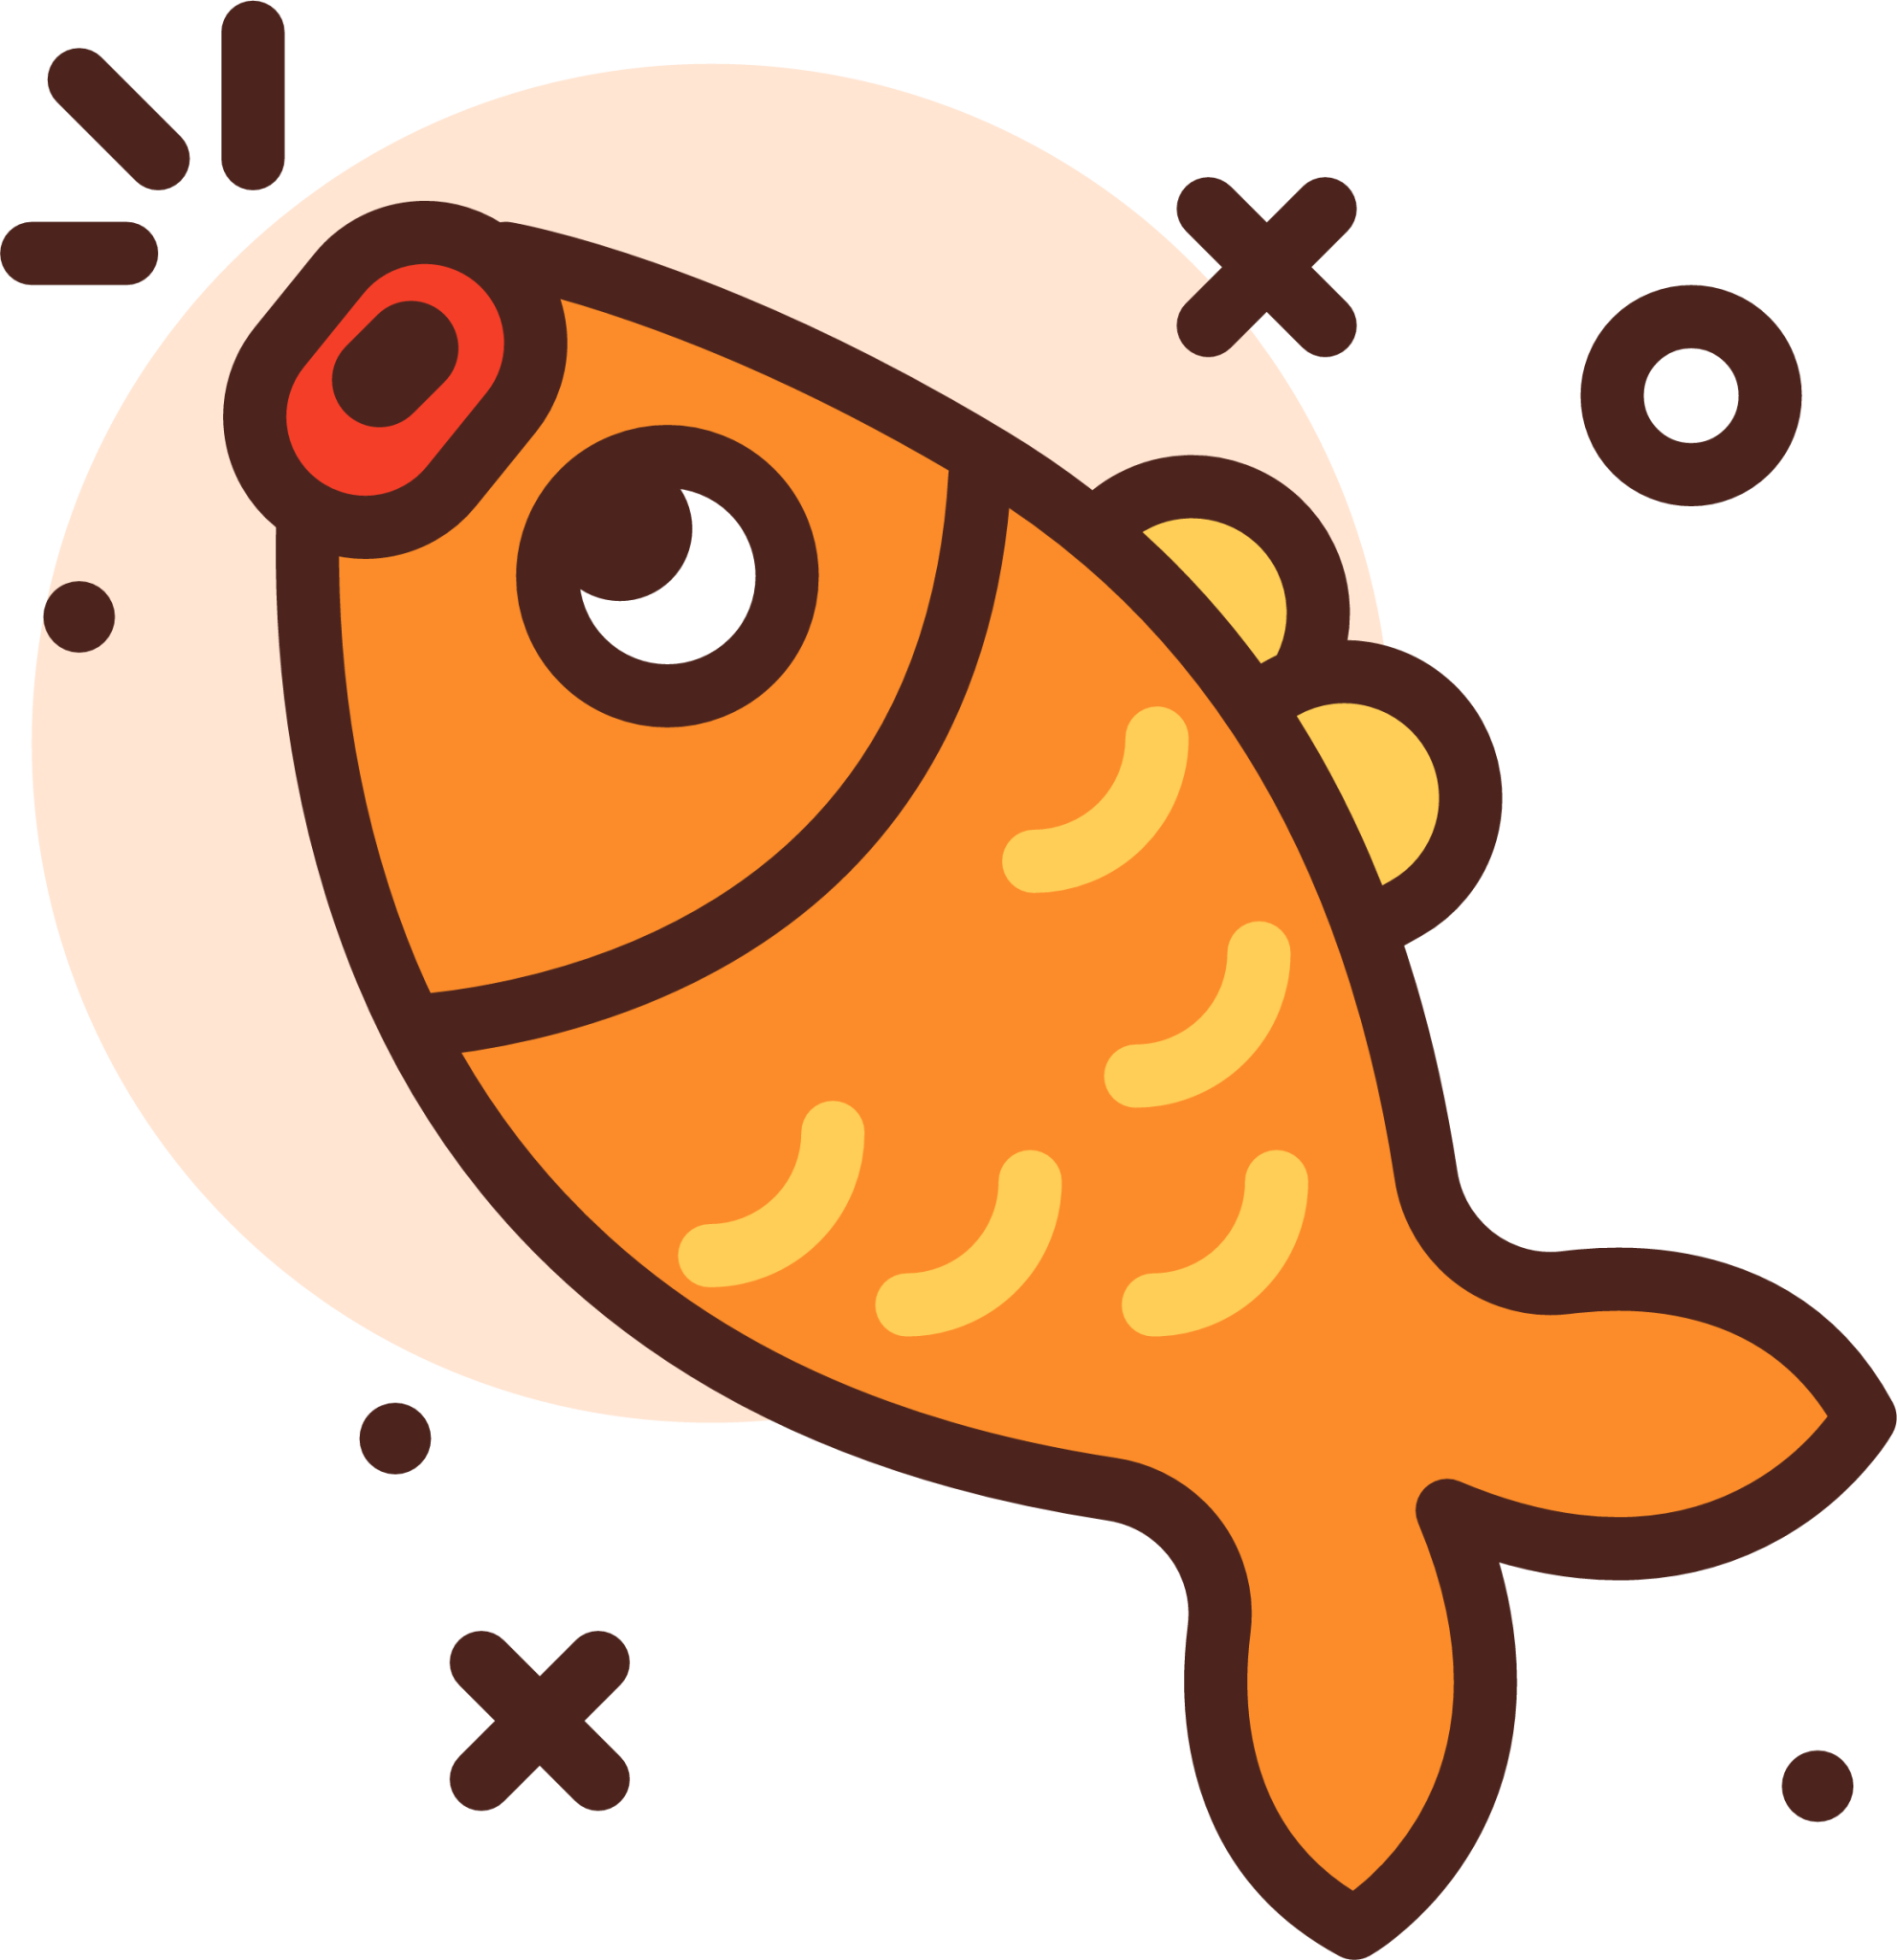 seafood icon